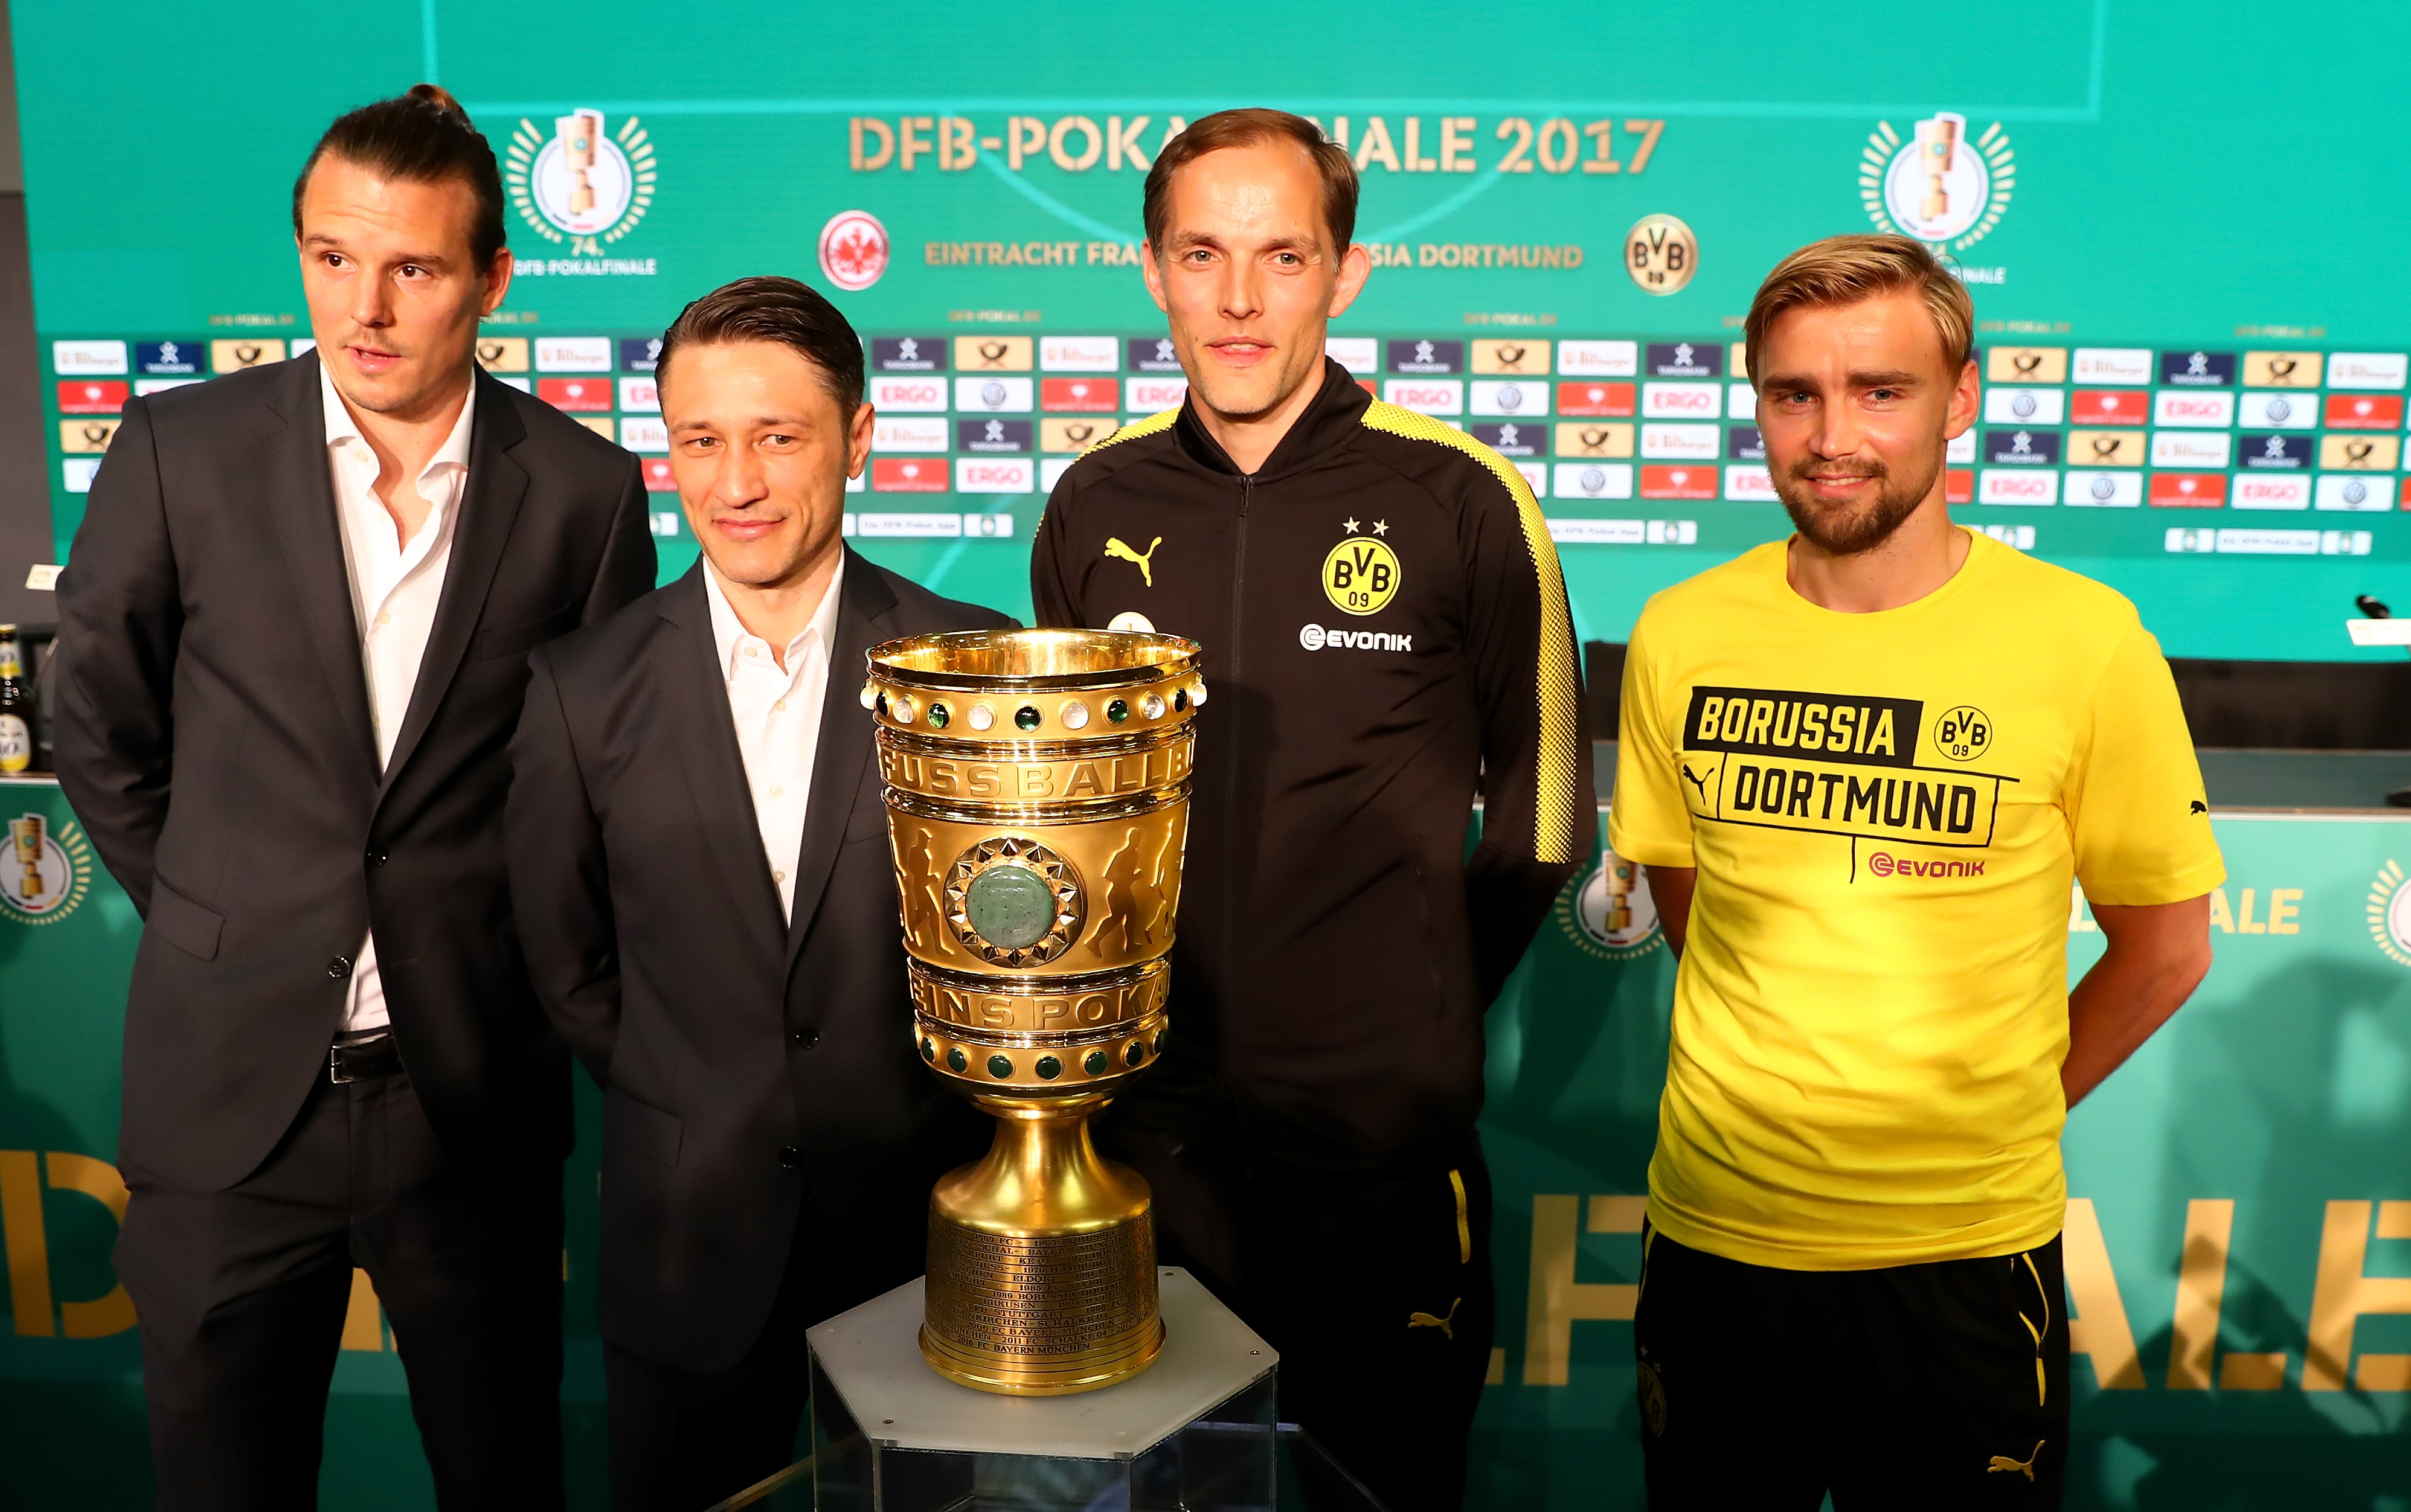 BERLIN, GERMANY - MAY 26:  Head coach of Eintracht Frankfurt Niko Kovac (2L), team captain of Eintracht Frankfurt Alexander Meier (L), head coach of Borussia Dortmund Thomas Tuchel (2R), team captain of Borussia Dortmund Marcel Schmelzer (R) pose woth the DFB Cup trophy after the DFB Cup Final 2017 press conference at Olympiastadion on May 26, 2017 in Berlin, Germany.  (Photo by Martin Rose/Bongarts/Getty Images)